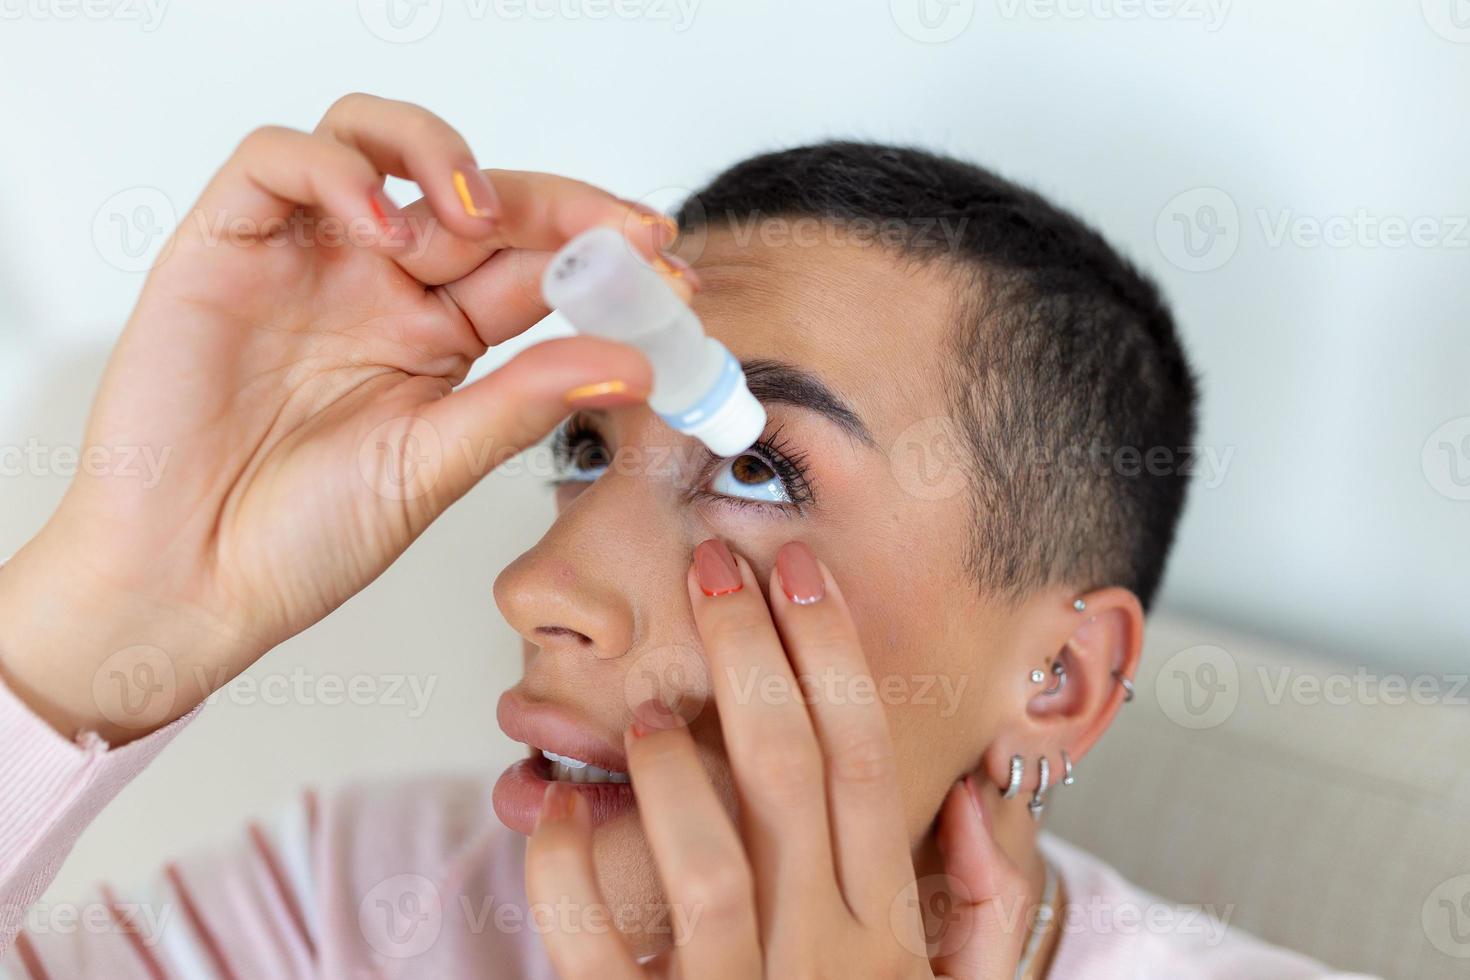 Woman using eye drop, woman dropping eye lubricant to treat dry eye or allergy, sick woman treating eyeball irritation or inflammation woman suffering from irritated eye, optical symptoms photo